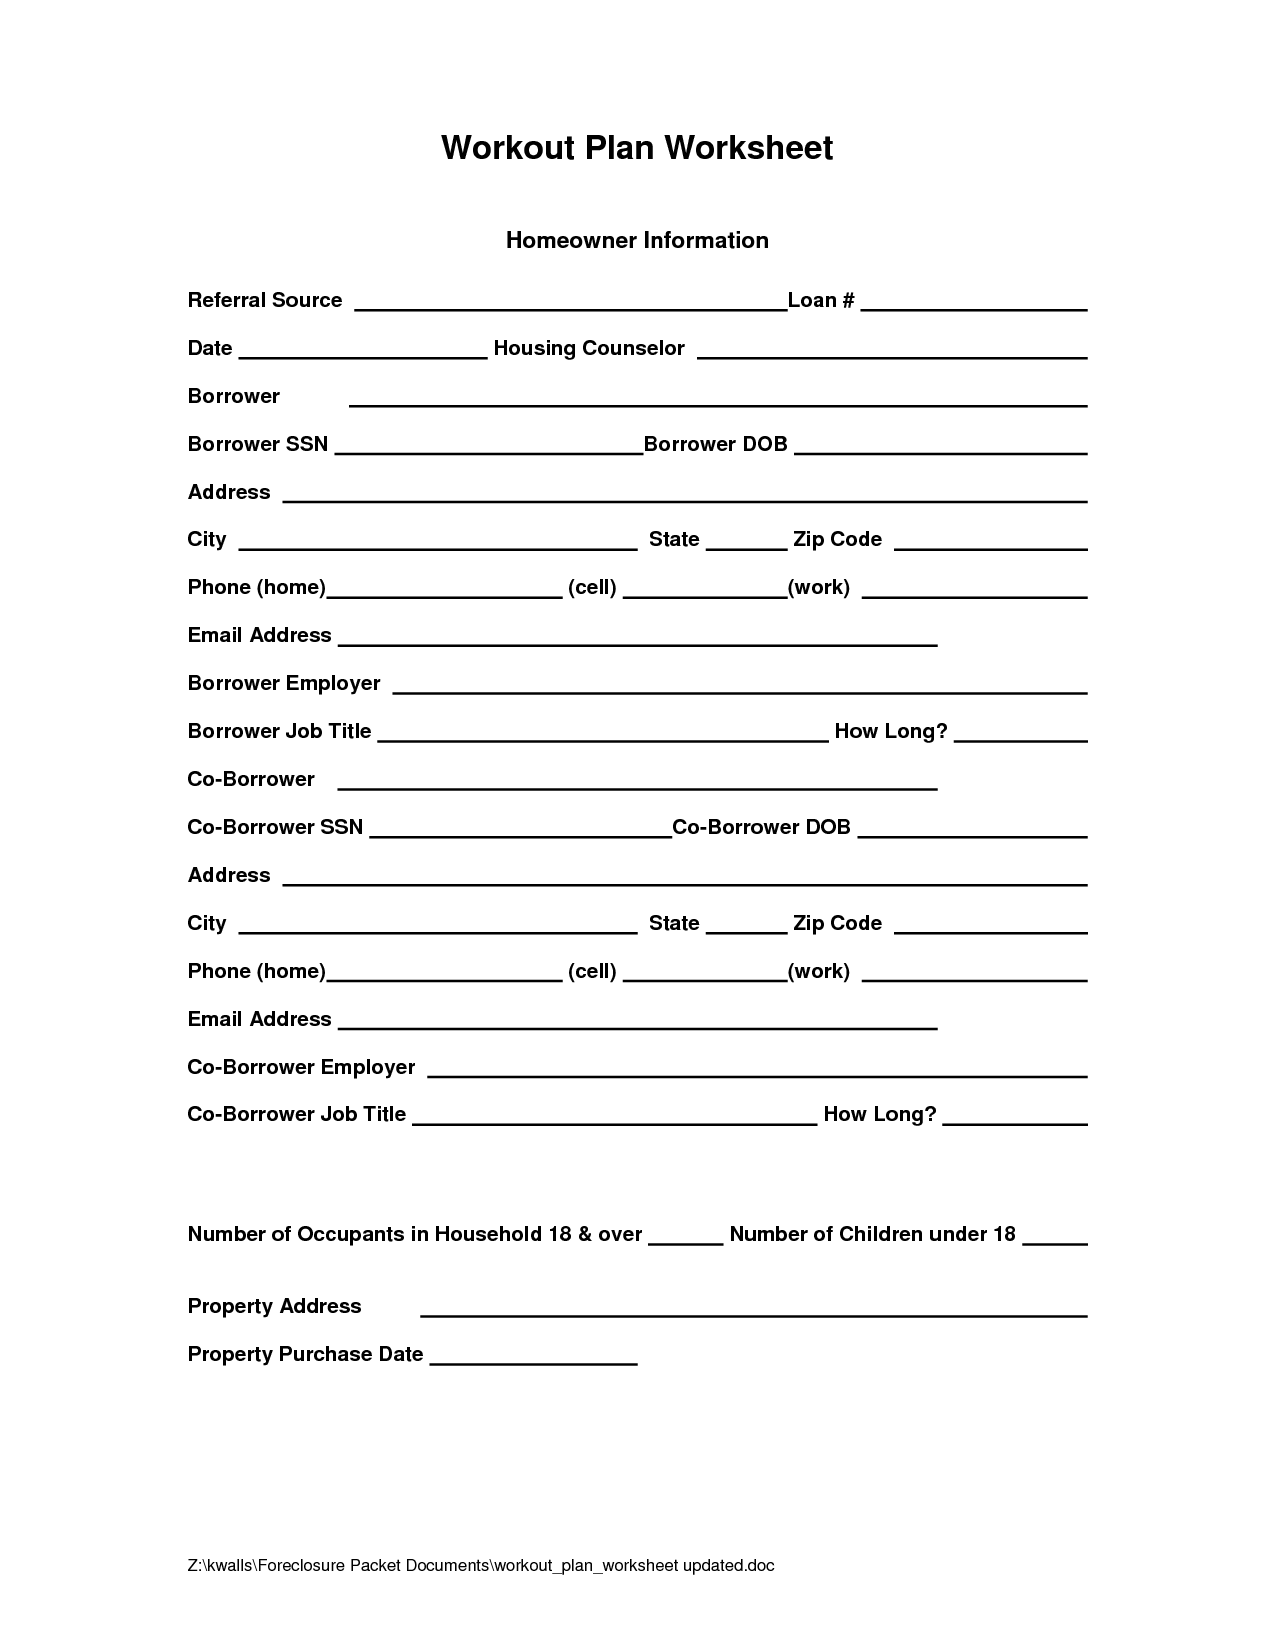 grief and loss worksheets for adults_166753